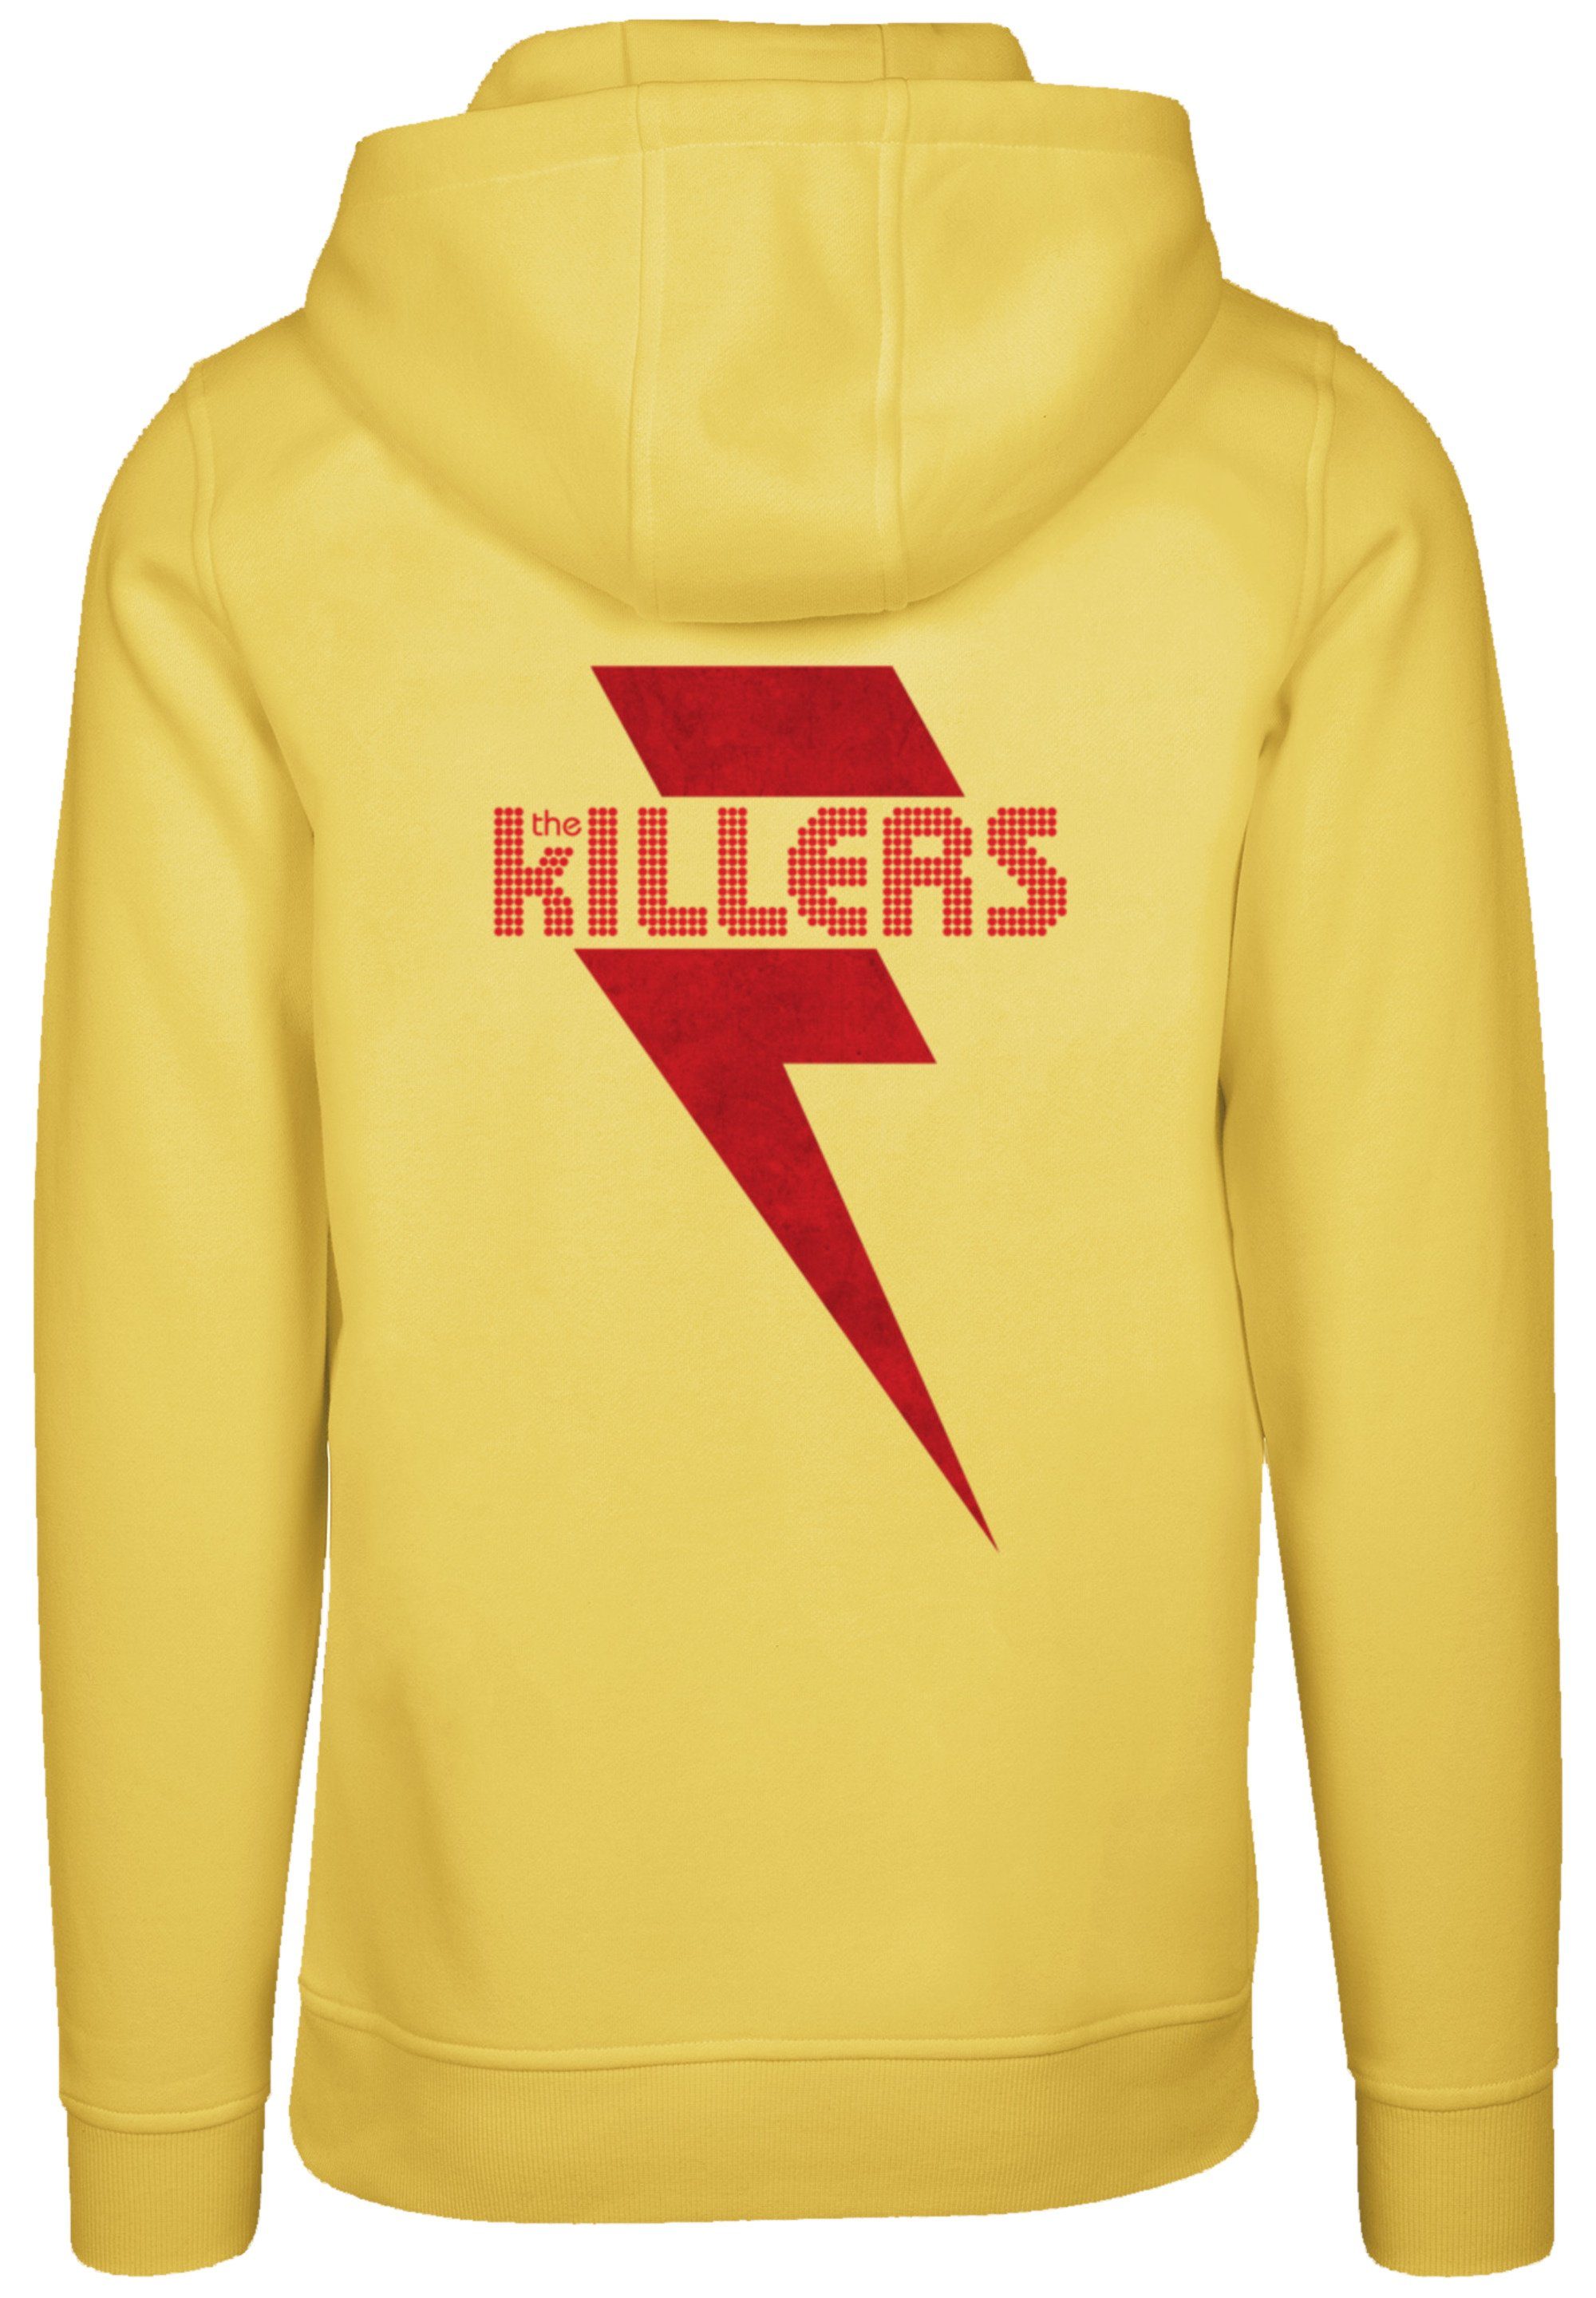 F4NT4STIC Kapuzenpullover The Killers Rock Musik Band Hoodie, Warm, Bequem taxi yellow